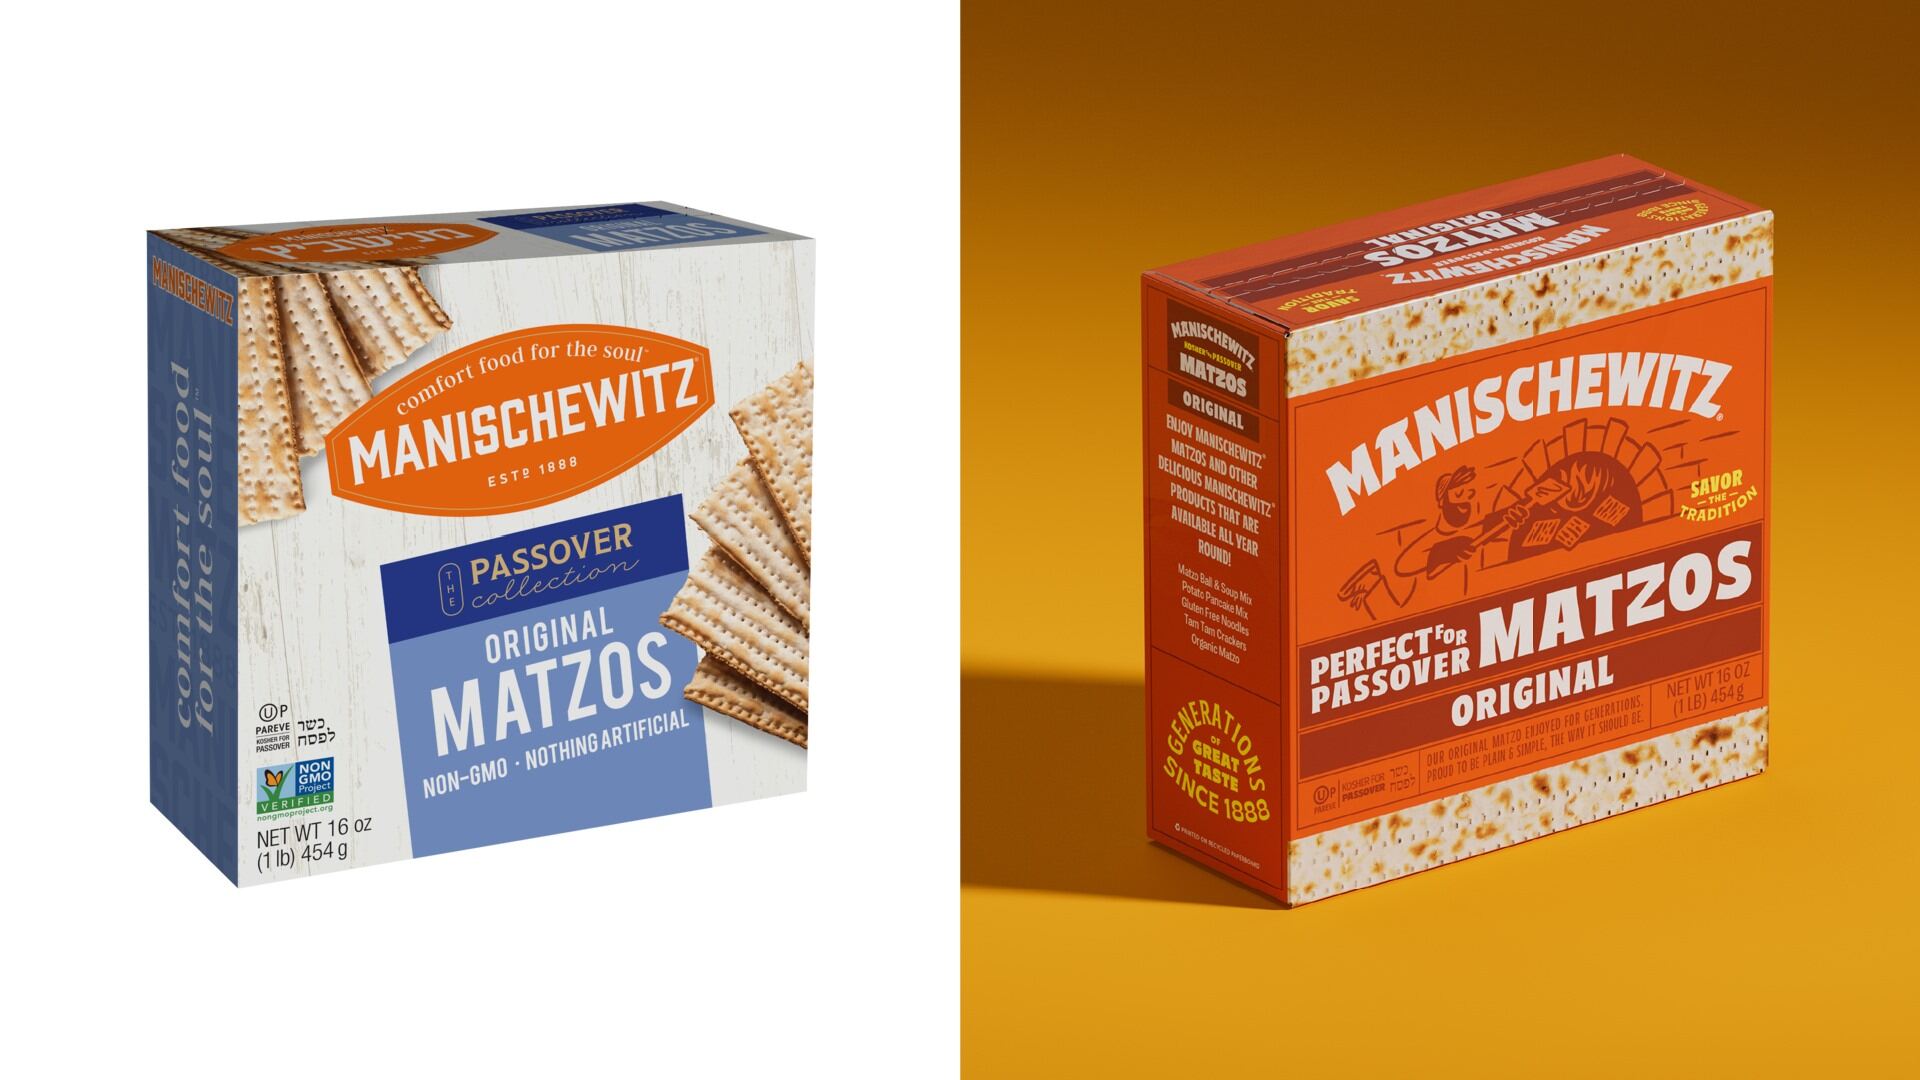 A fifth question this Passover: Why does that Manischewitz matzah box look so different?